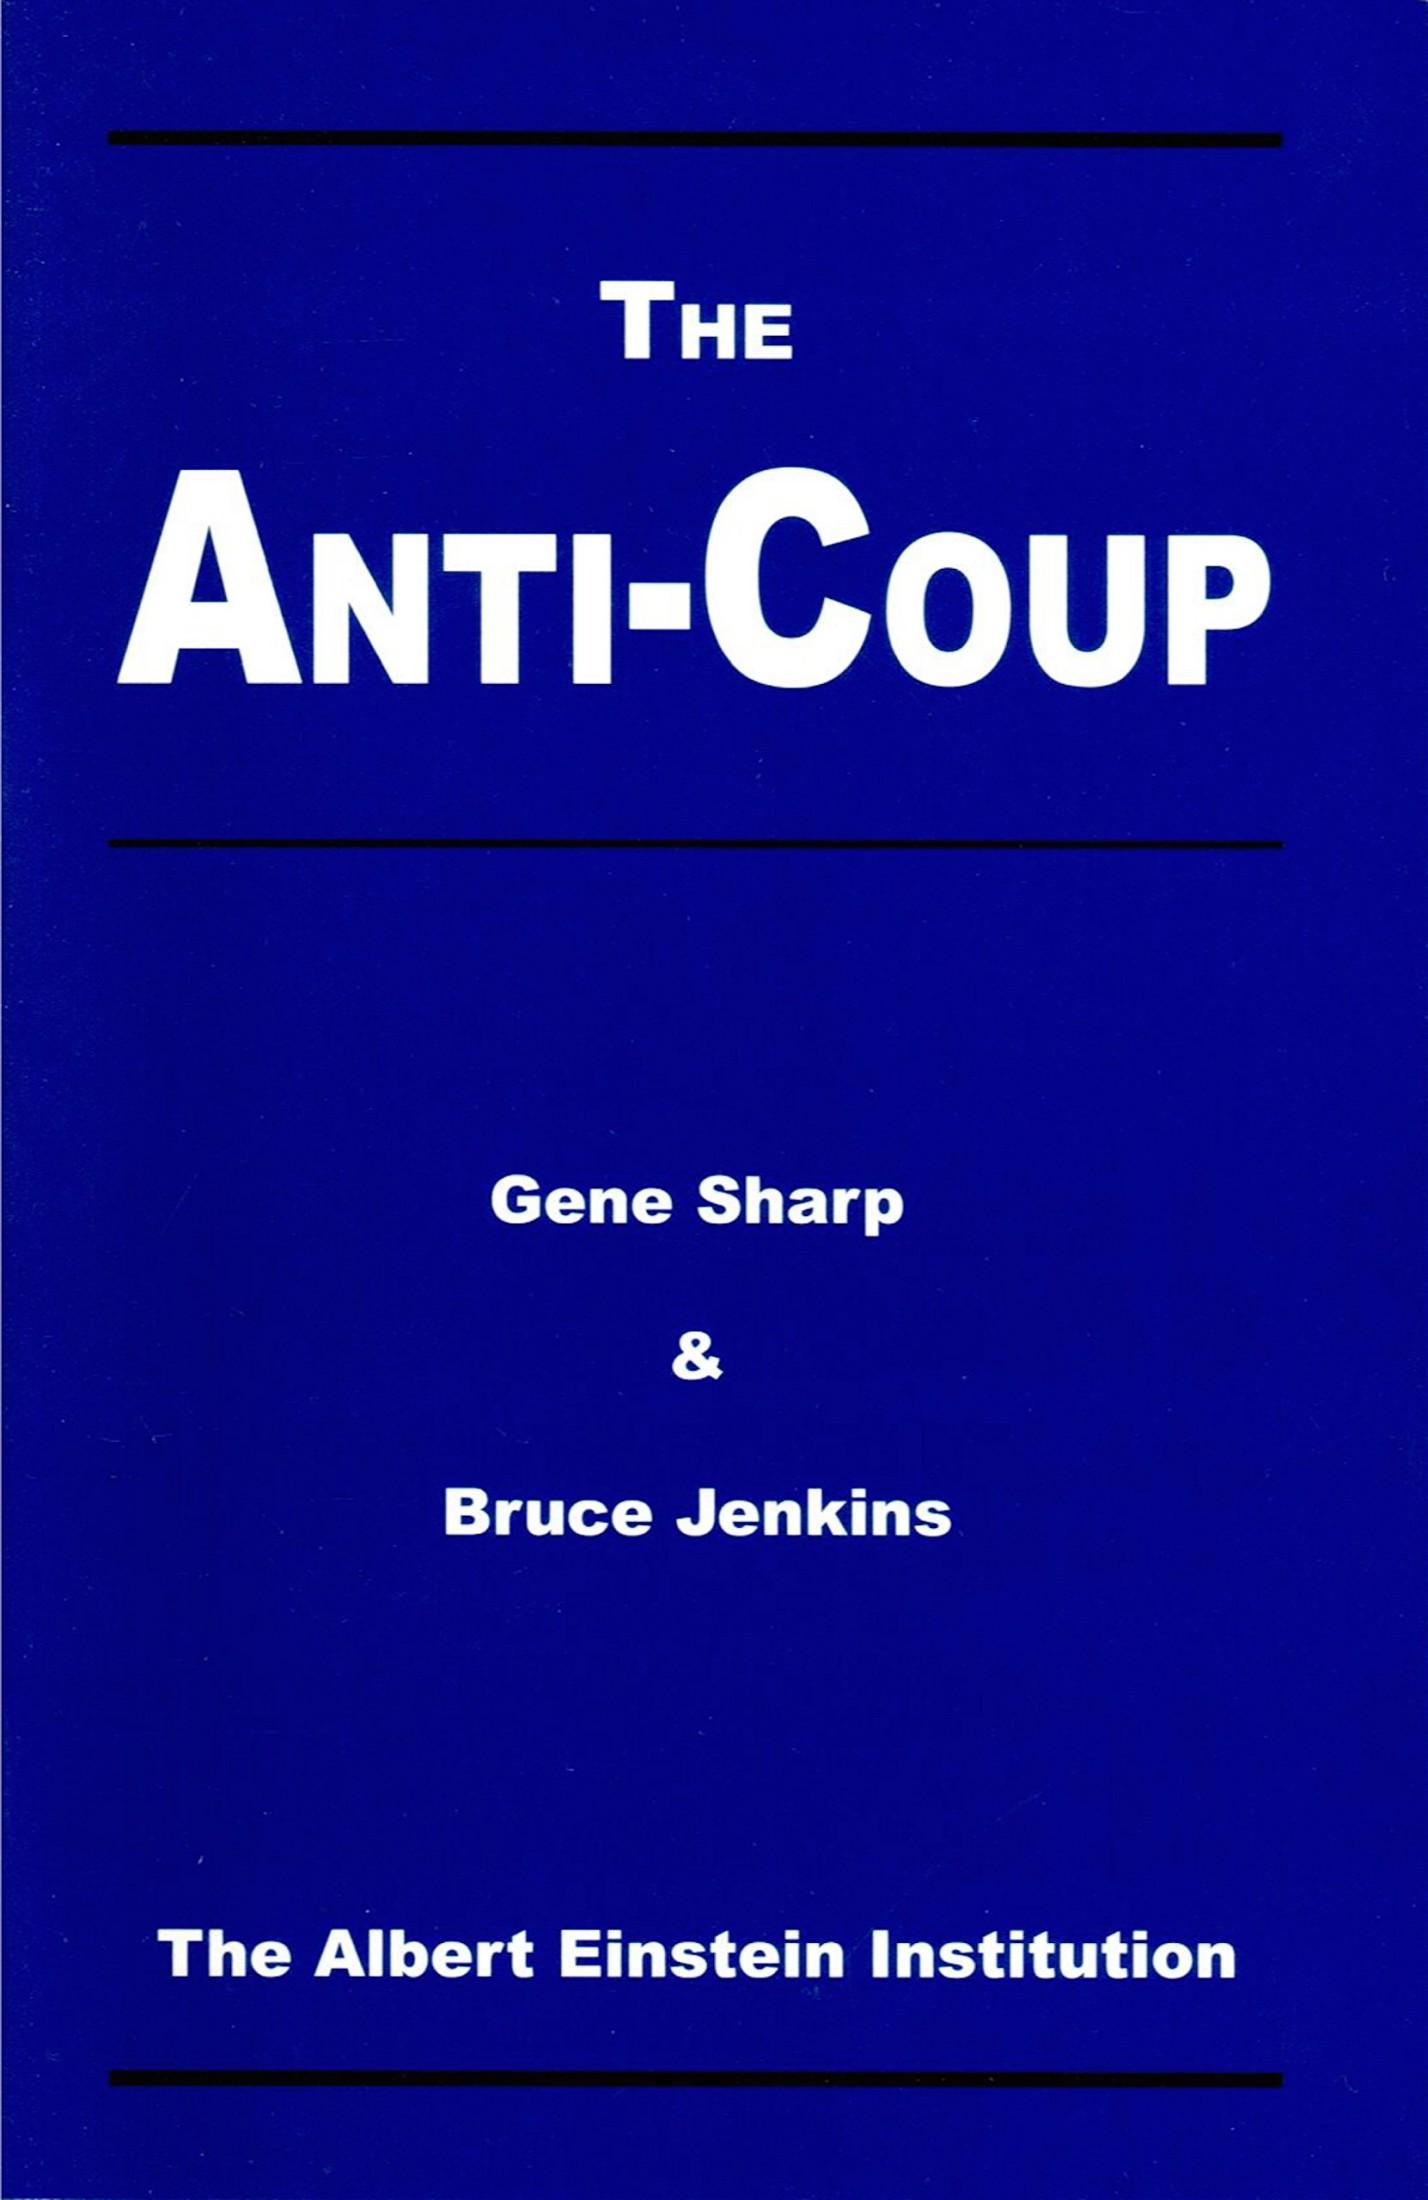 The Anti-Coup (2004) by Bruce Jenkins & Gene Sharp